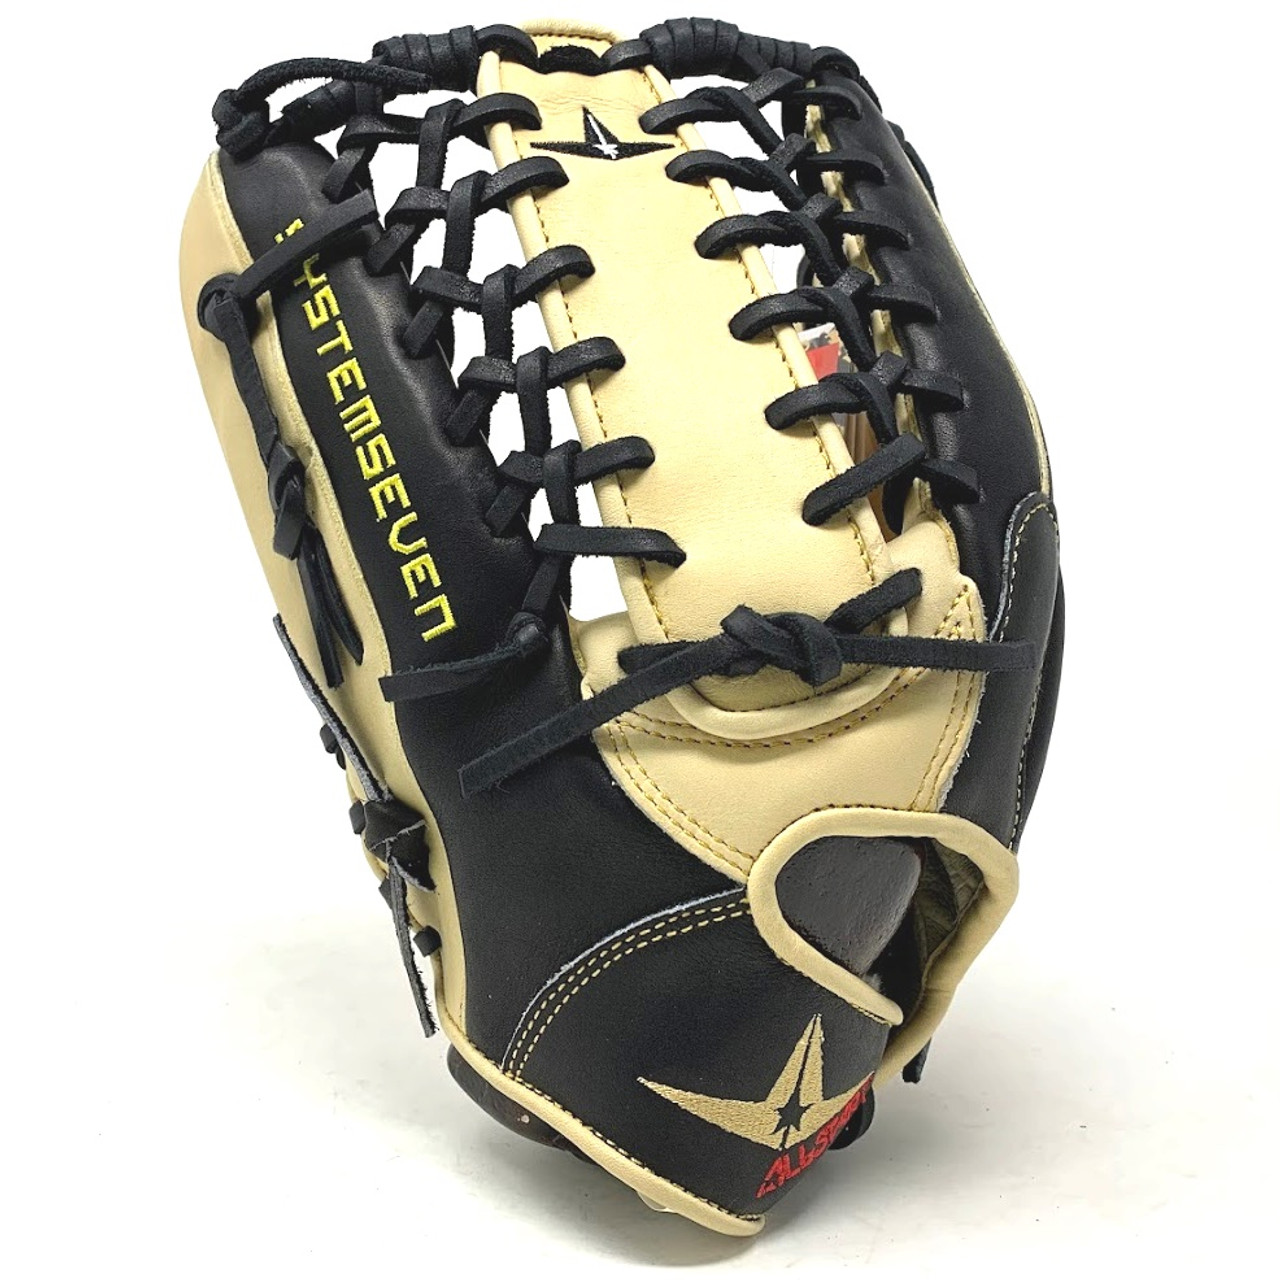  Golden Stage Baseball Hard Grub for Outfielders, Size 12 :  Sports & Outdoors